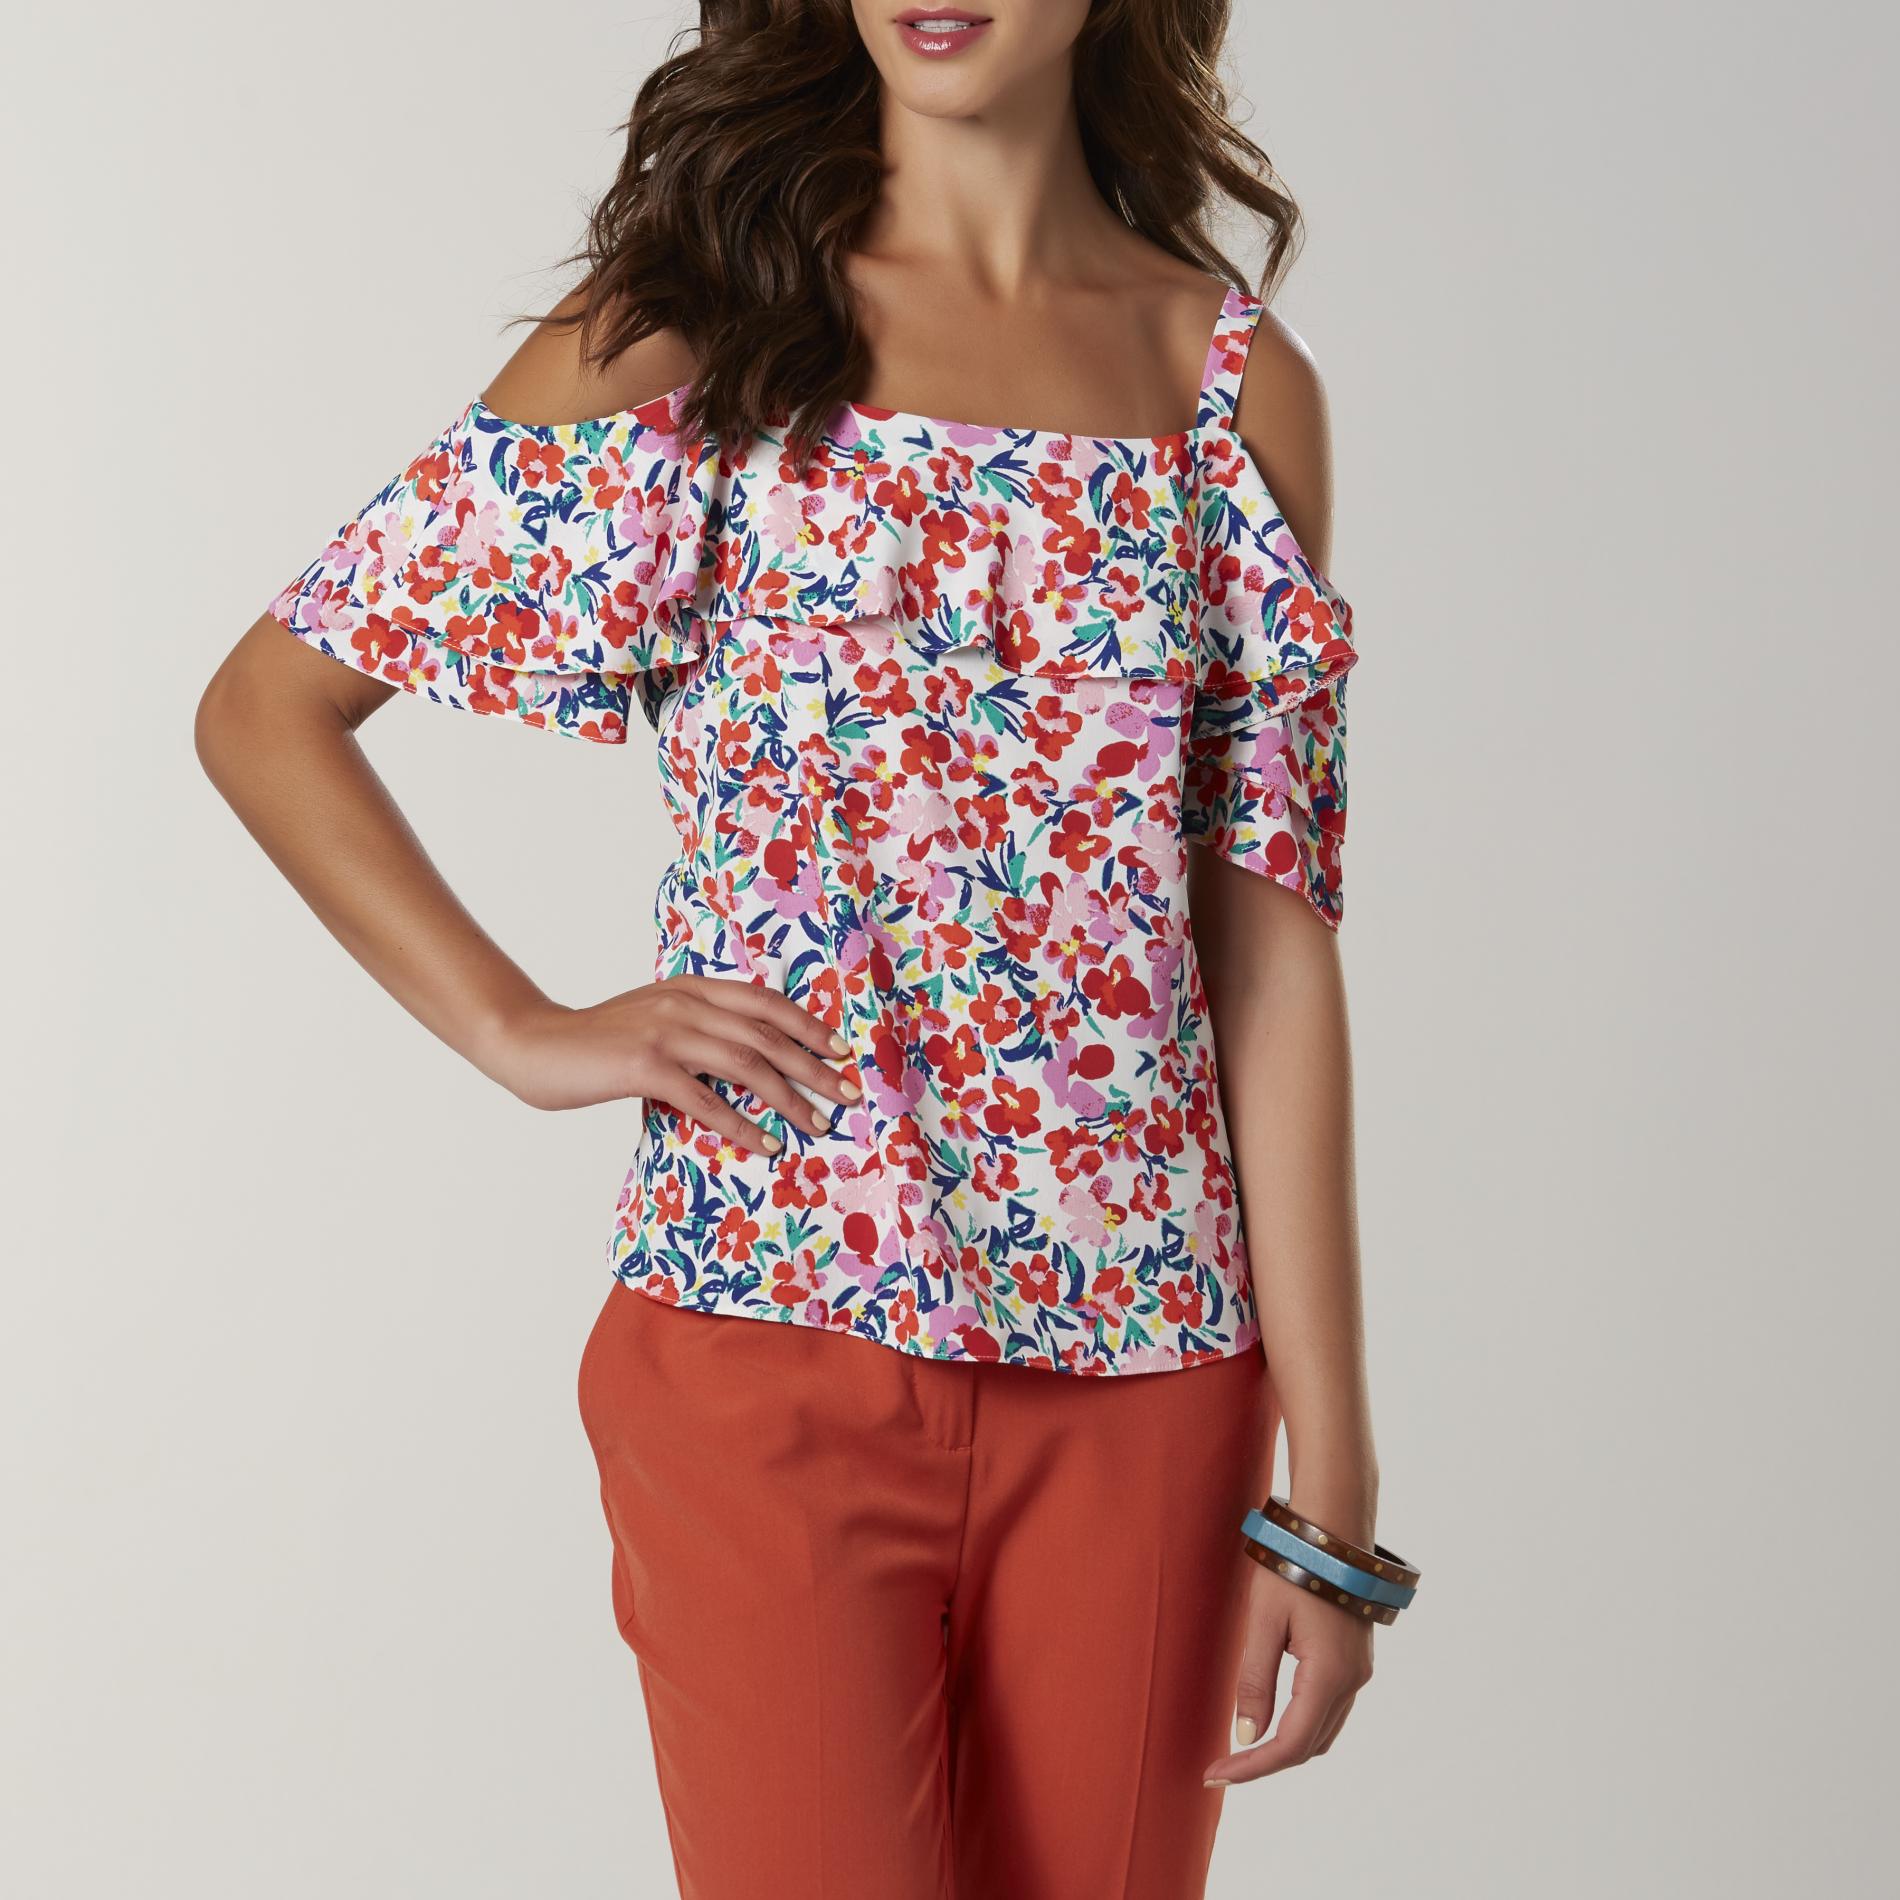 Simply Styled Women's Cold Shoulder Top - Floral